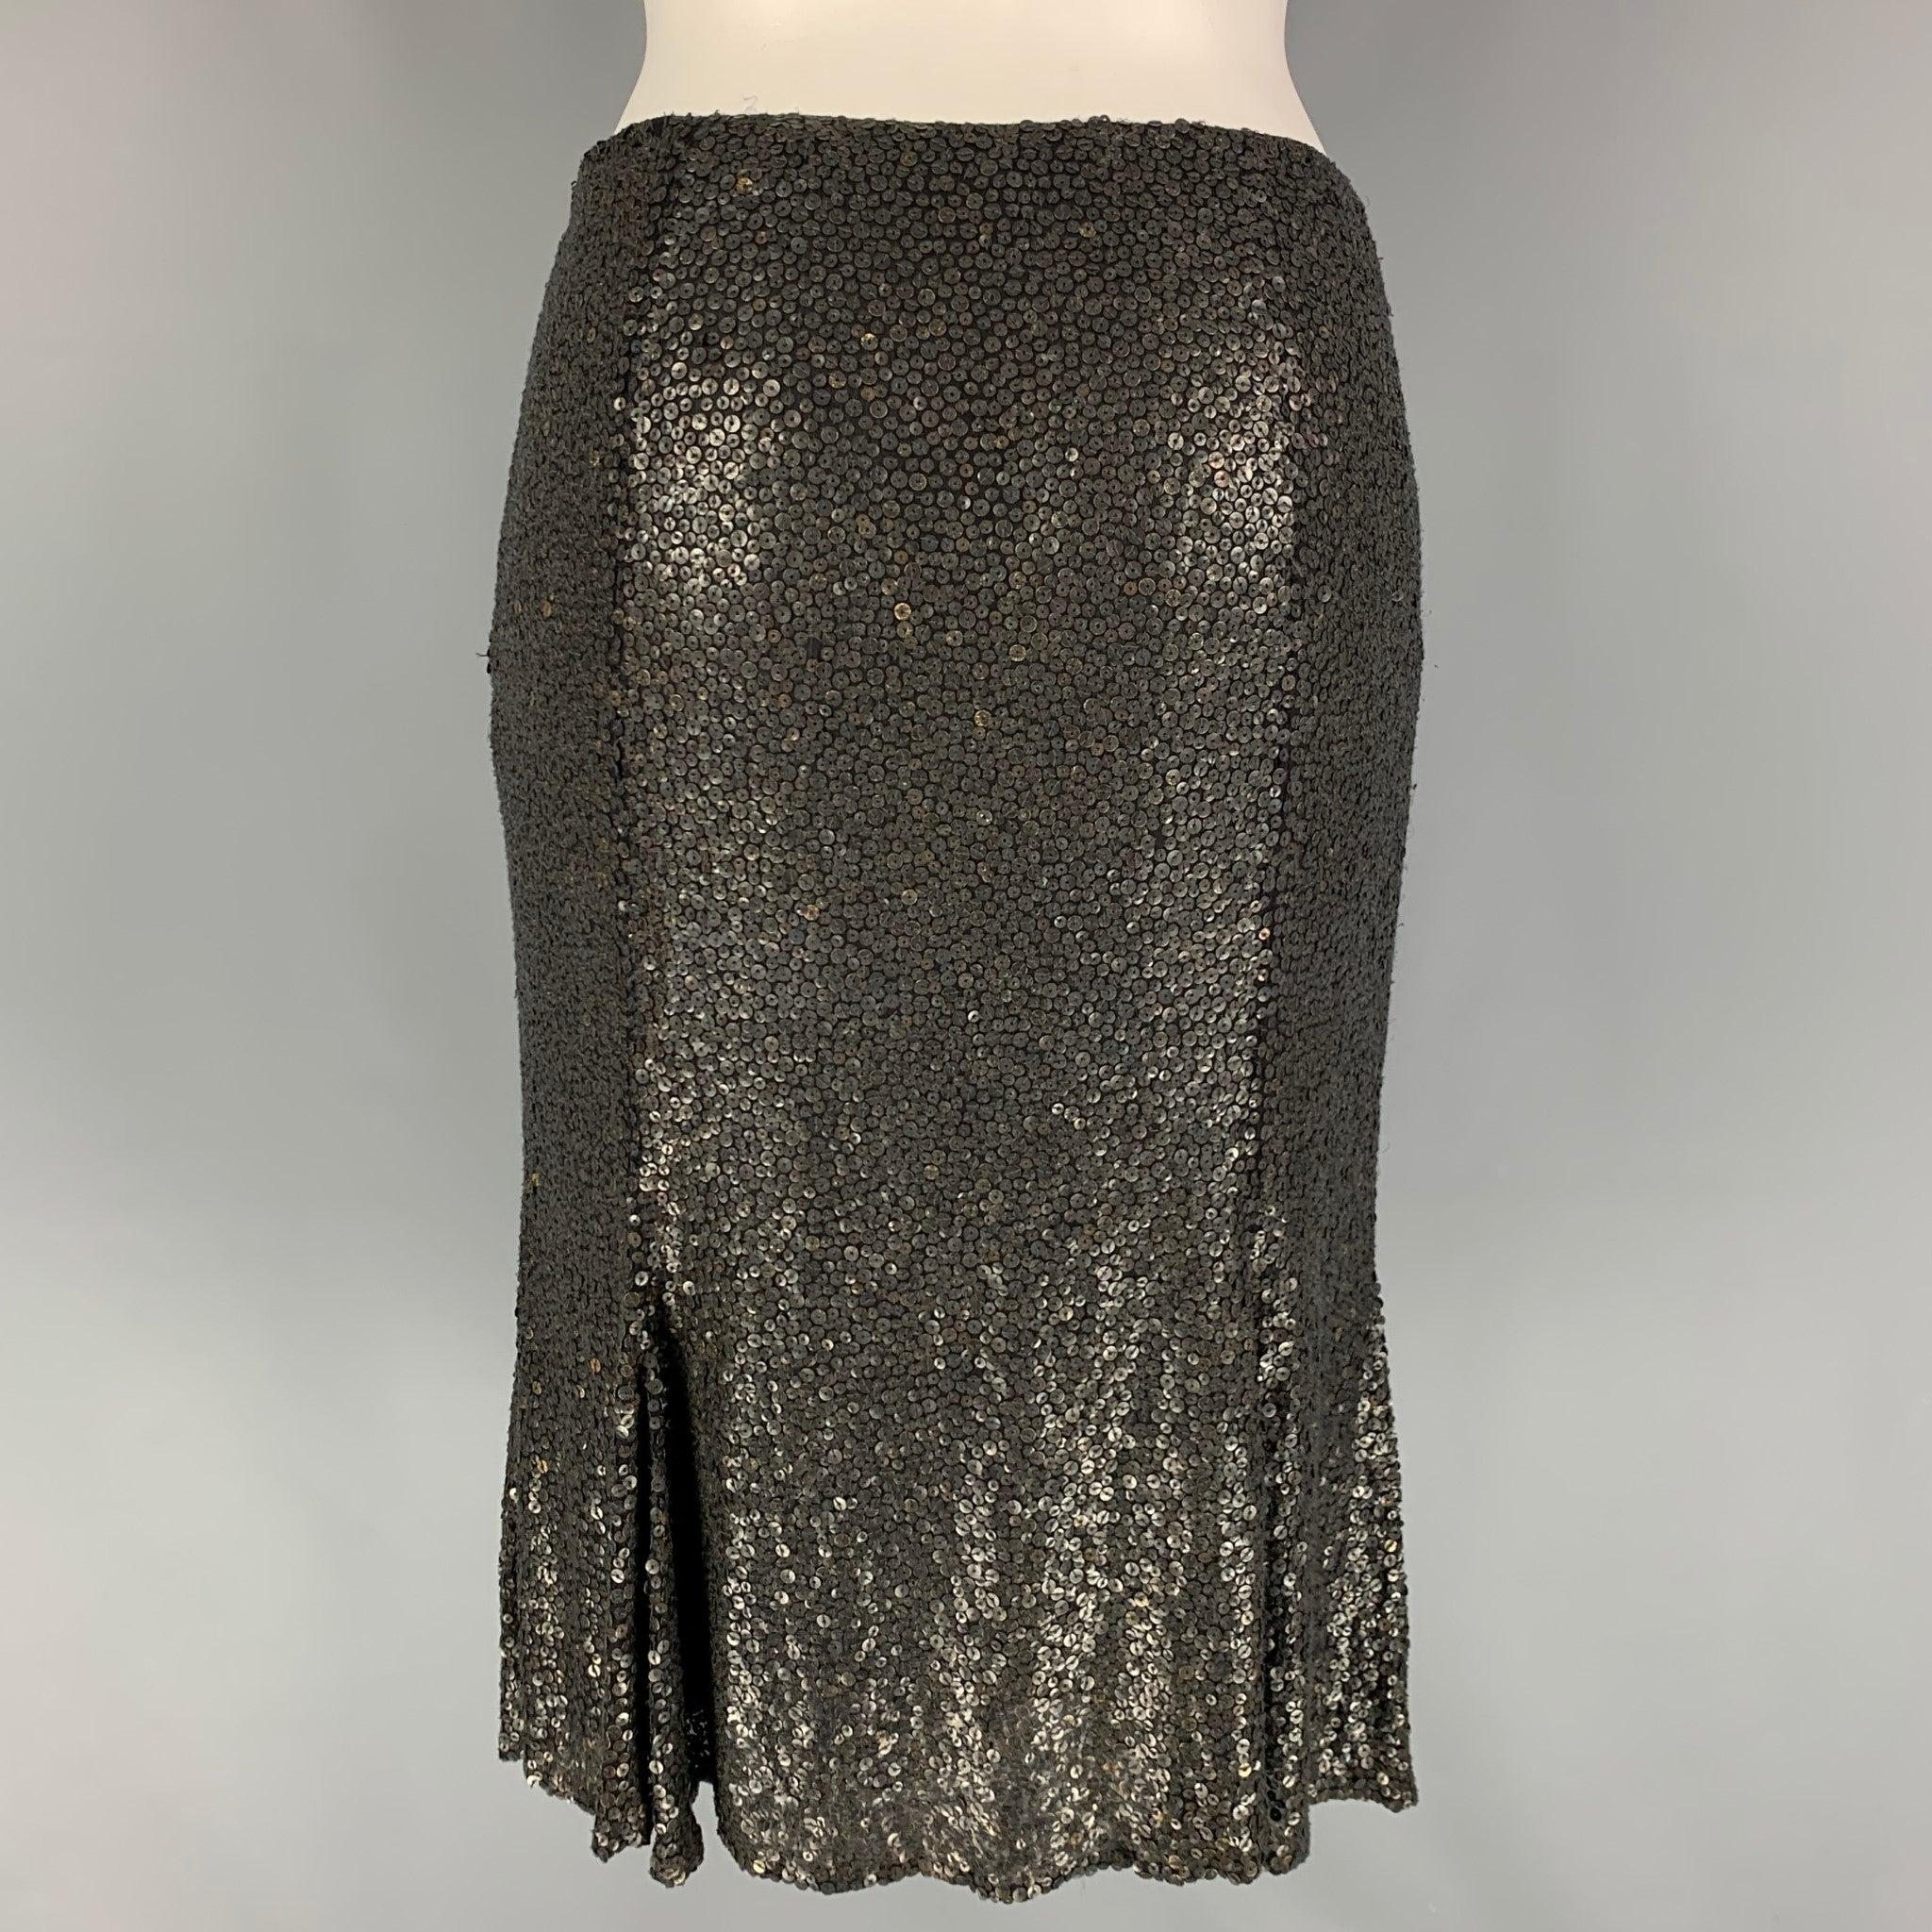 NAEEM KHAN Size 4 Black Charcoal Sequined Tulip Skirt In Good Condition For Sale In San Francisco, CA